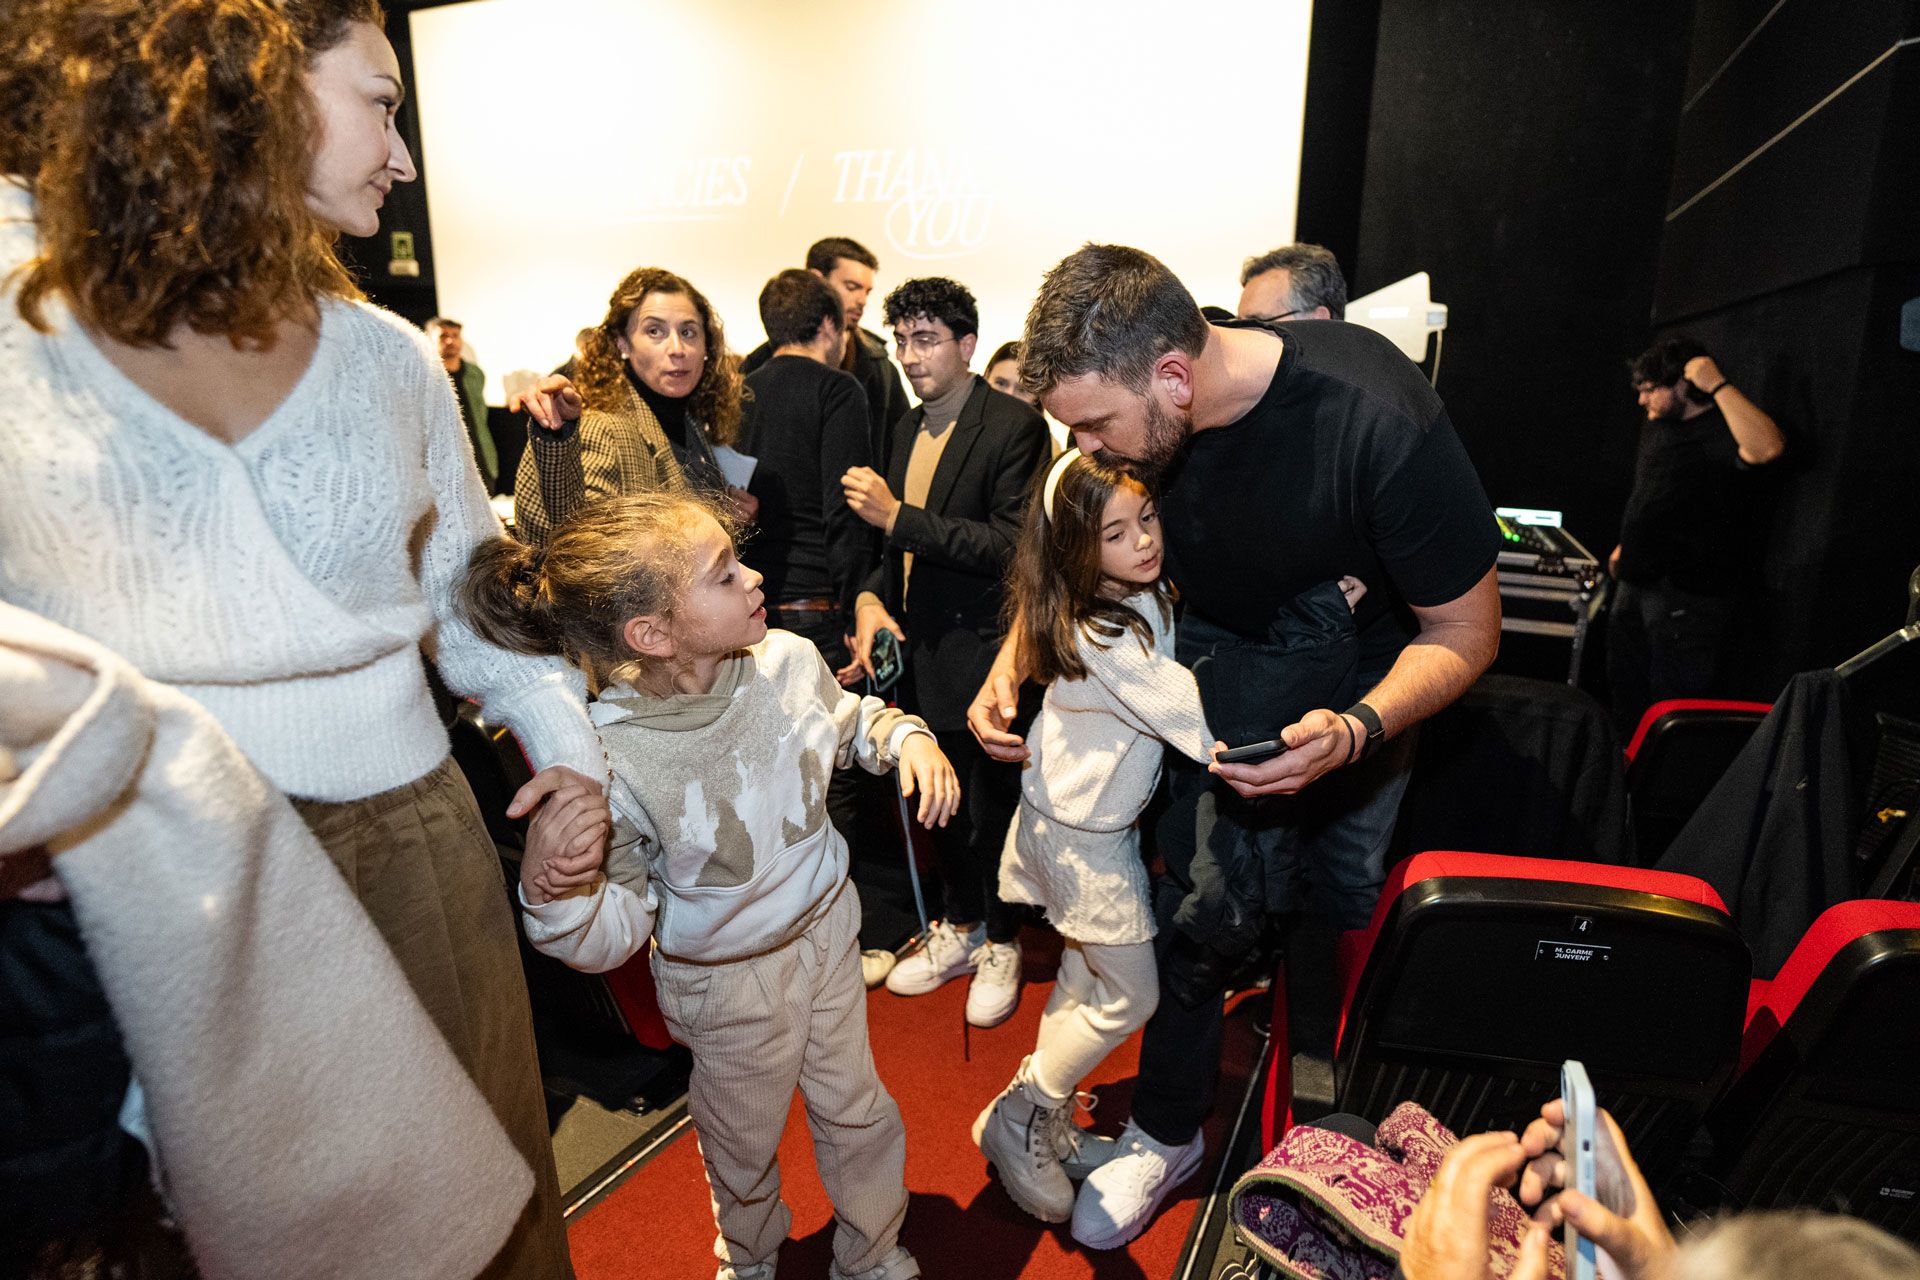 BARCELONA, SPAIN - JANUARY 31: Marc Gasol hugs his family as wife Cristina Blesa looks on at the cinema where he has just announced his retirement after 20 years in basketball on January 31, 2024 in Barcelona, Spain. The Spanish center hit big career highs, scoring three All-Star selections, grabbing an NBA title with the Toronto Raptors, and being named the NBA's Defensive Player of the Year in 2012-13.